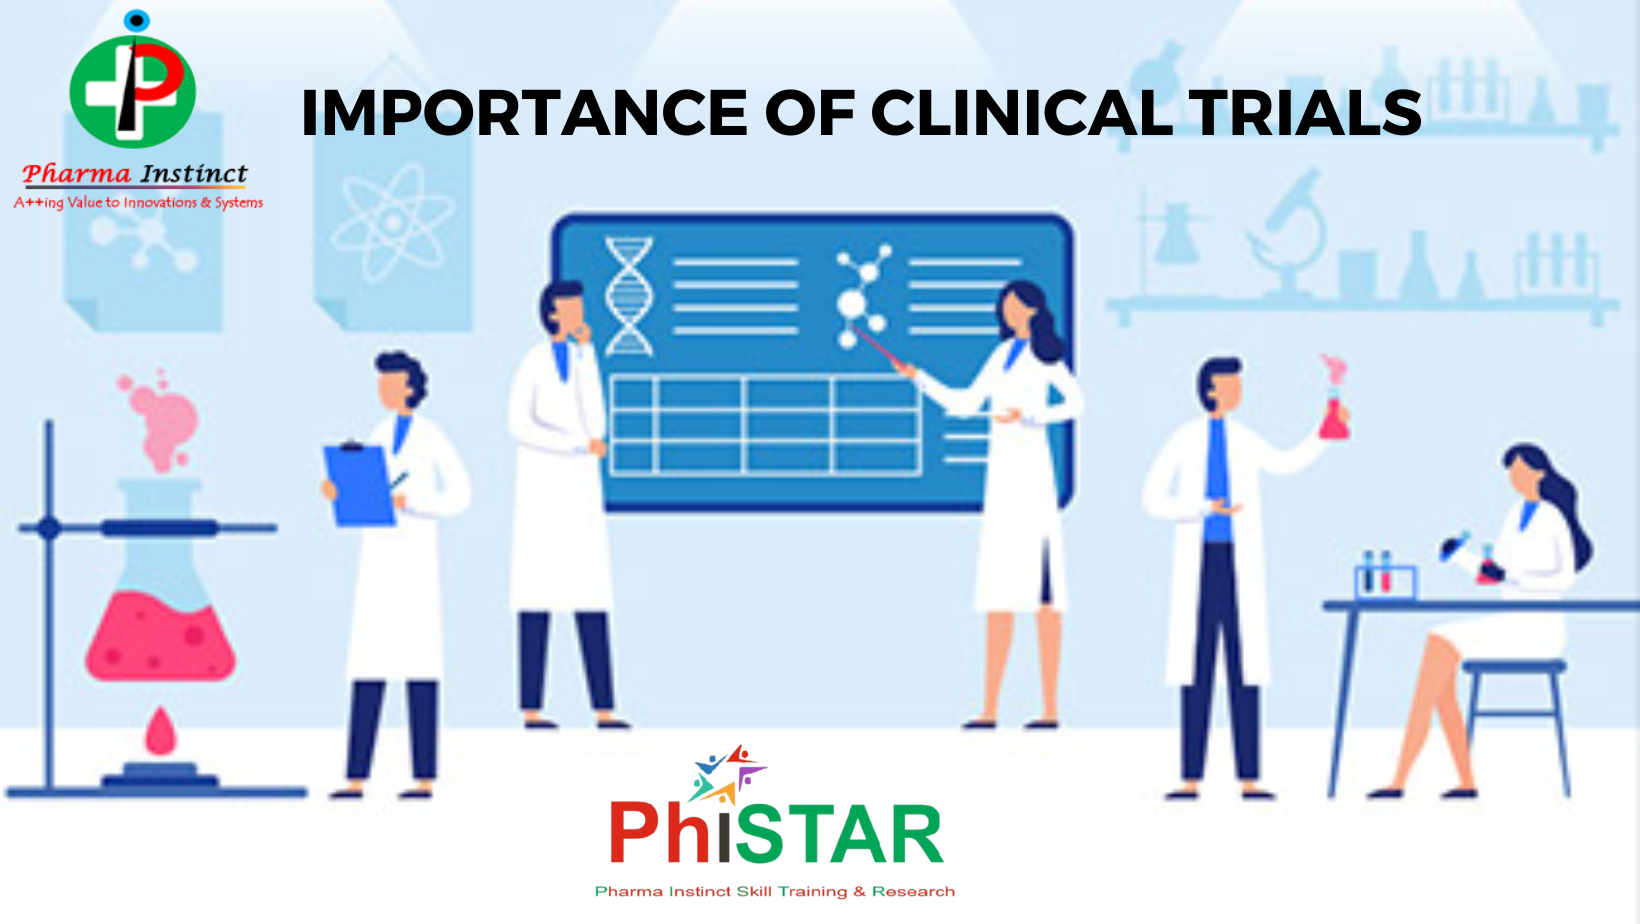 IMPORTANCE OF CLINICAL TRIALS